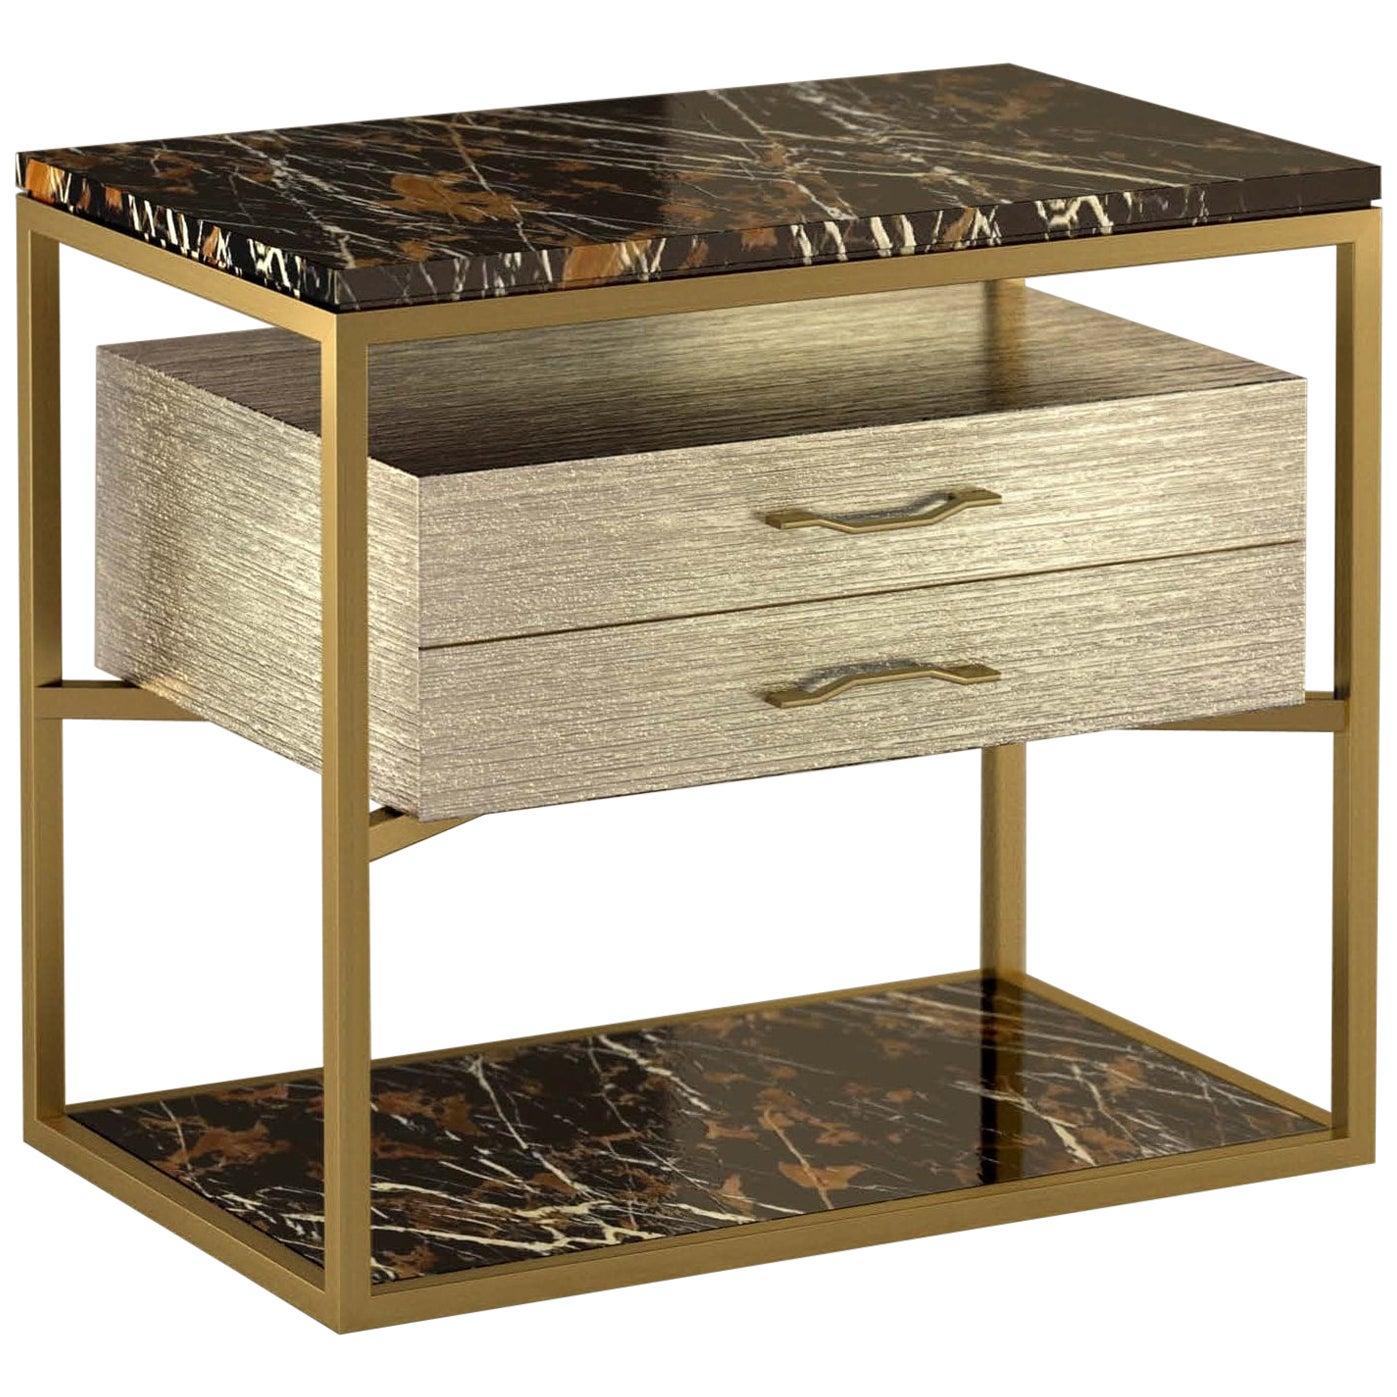 Giovannozzi Home, Bedside Table "Garbo" Black Marble and Metal Brass Finish Italy For Sale